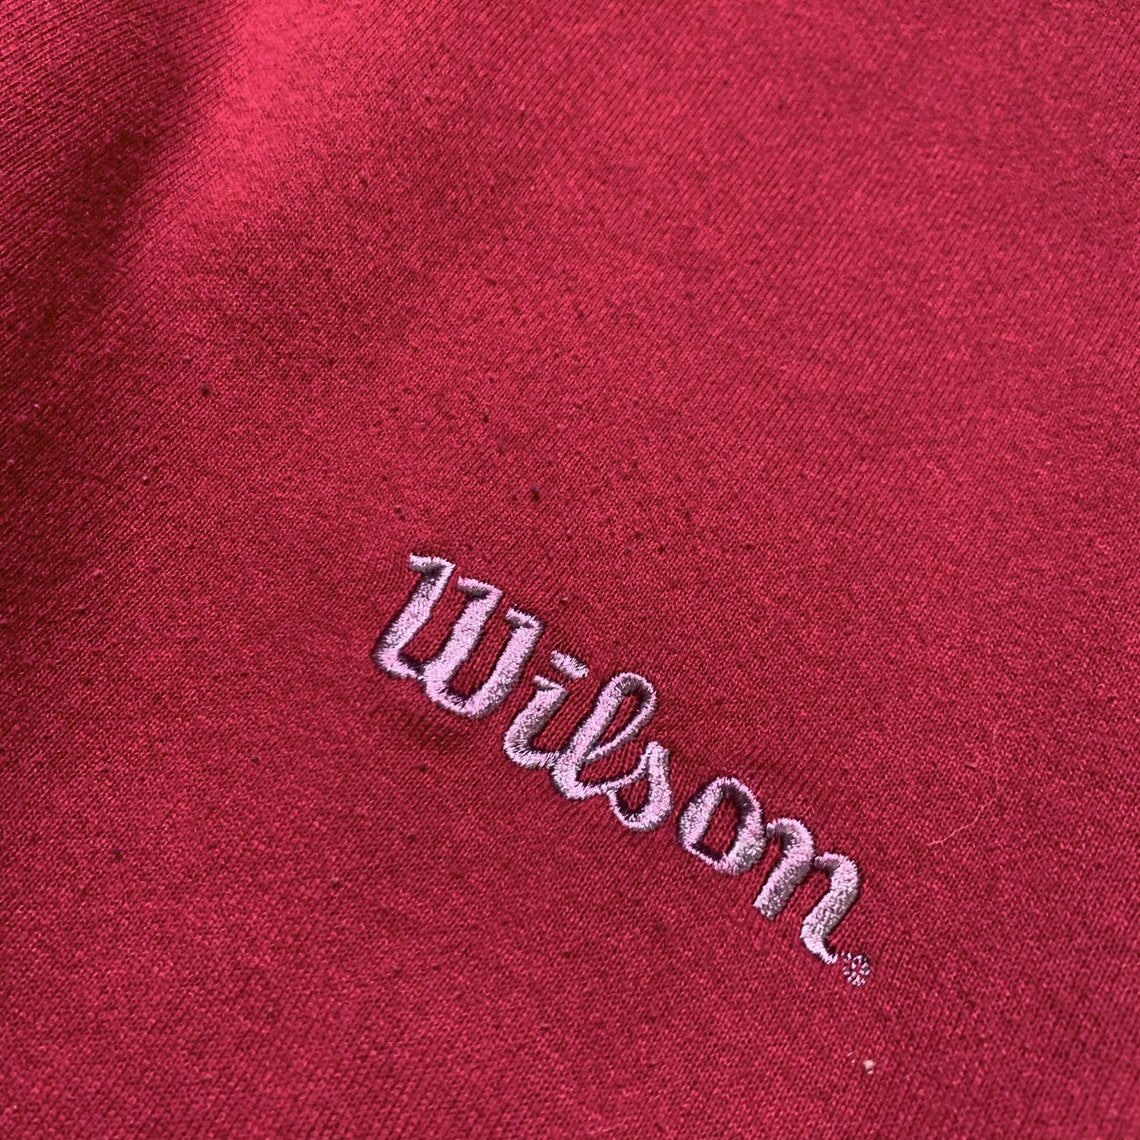 Vintage Wilson Sweatshirt Wilson Embroidered Logo Red and | Etsy